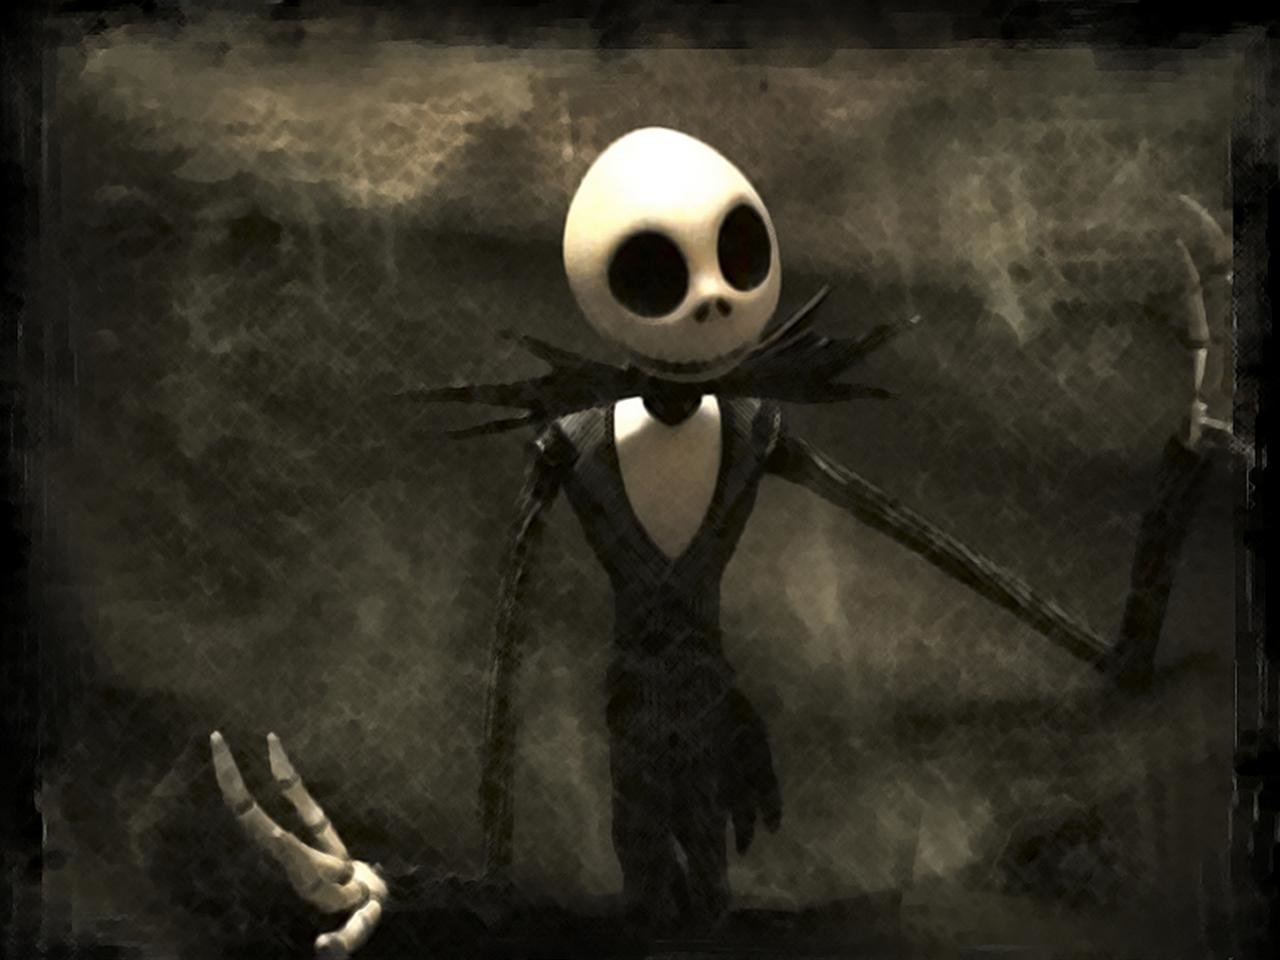 Download Hd The Nightmare Before Christmas Pc Wallpaper - Jack And Corpse Bride - HD Wallpaper 